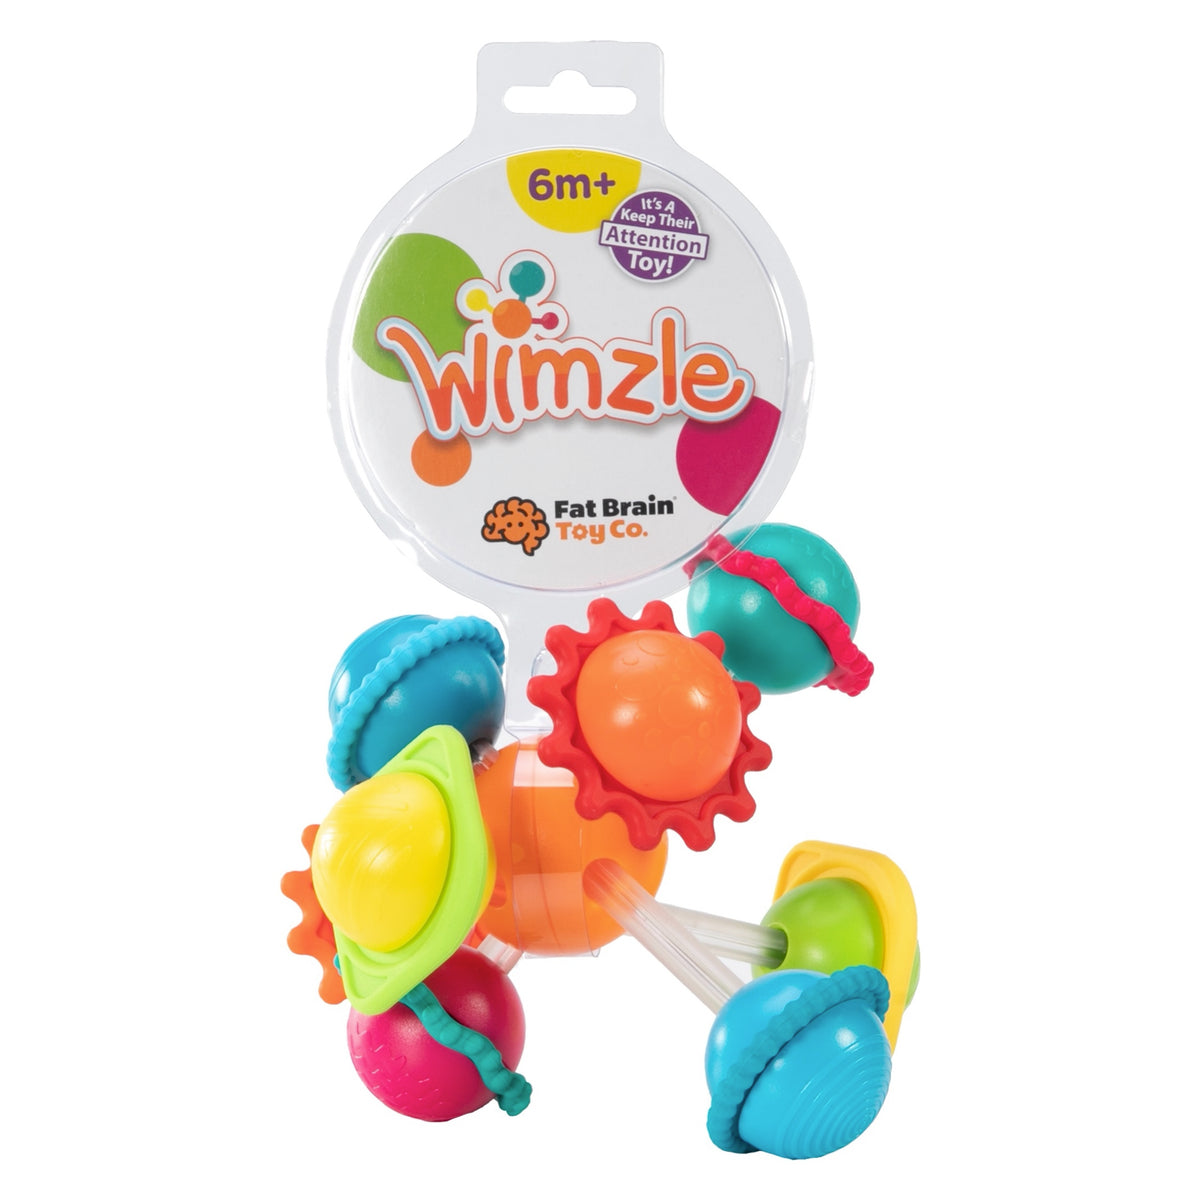 Fat Brain Toys Wimzle – Dimples Baby Brooklyn